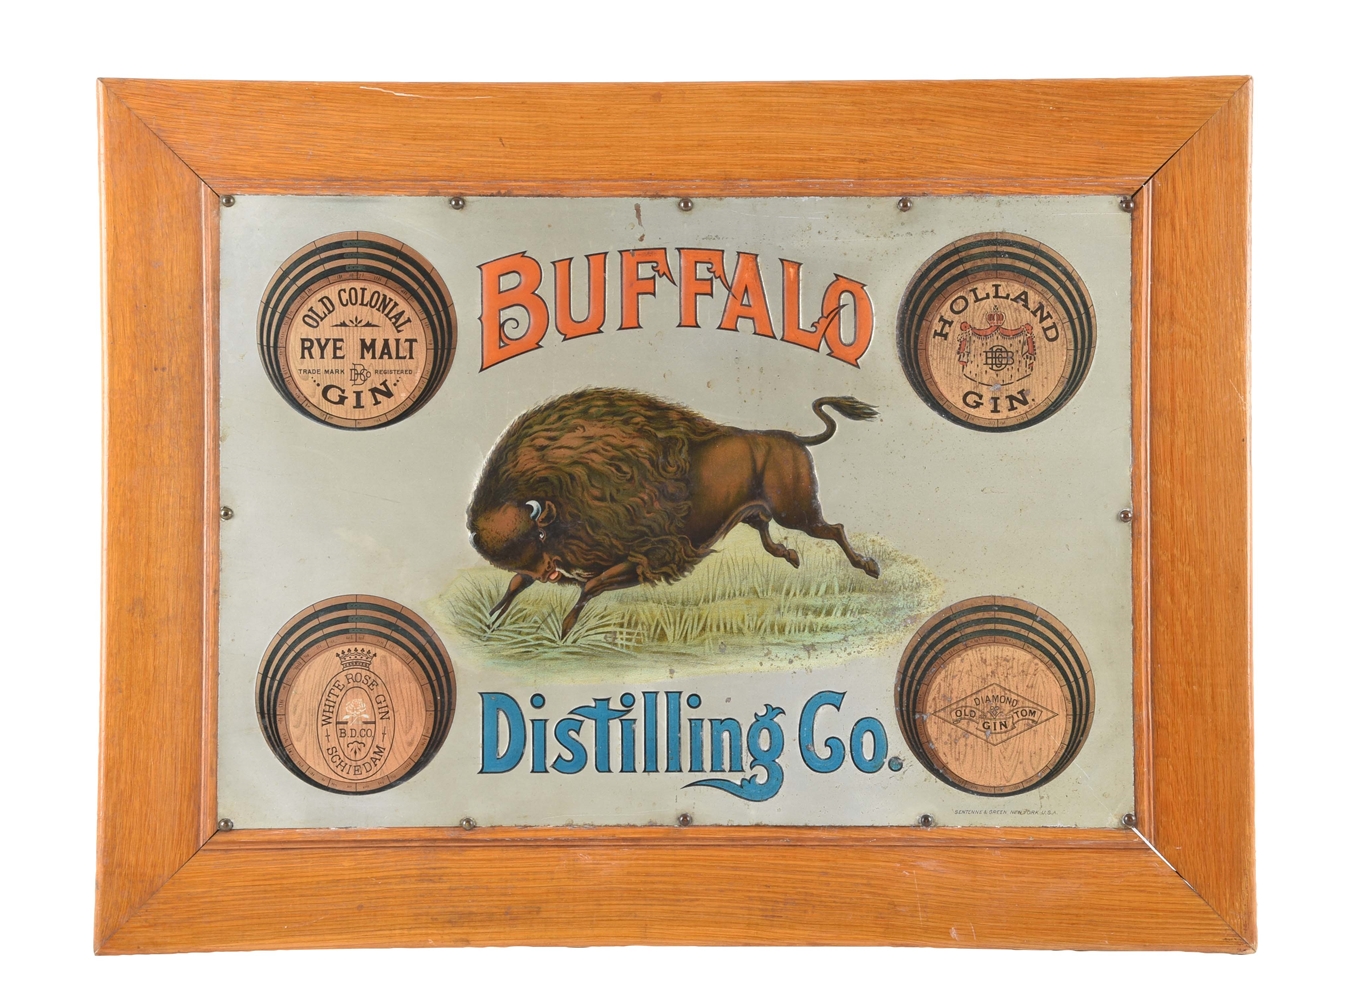 EARLY BUFFALO DISTILLING CO. EMBOSSED TIN SIGN. 